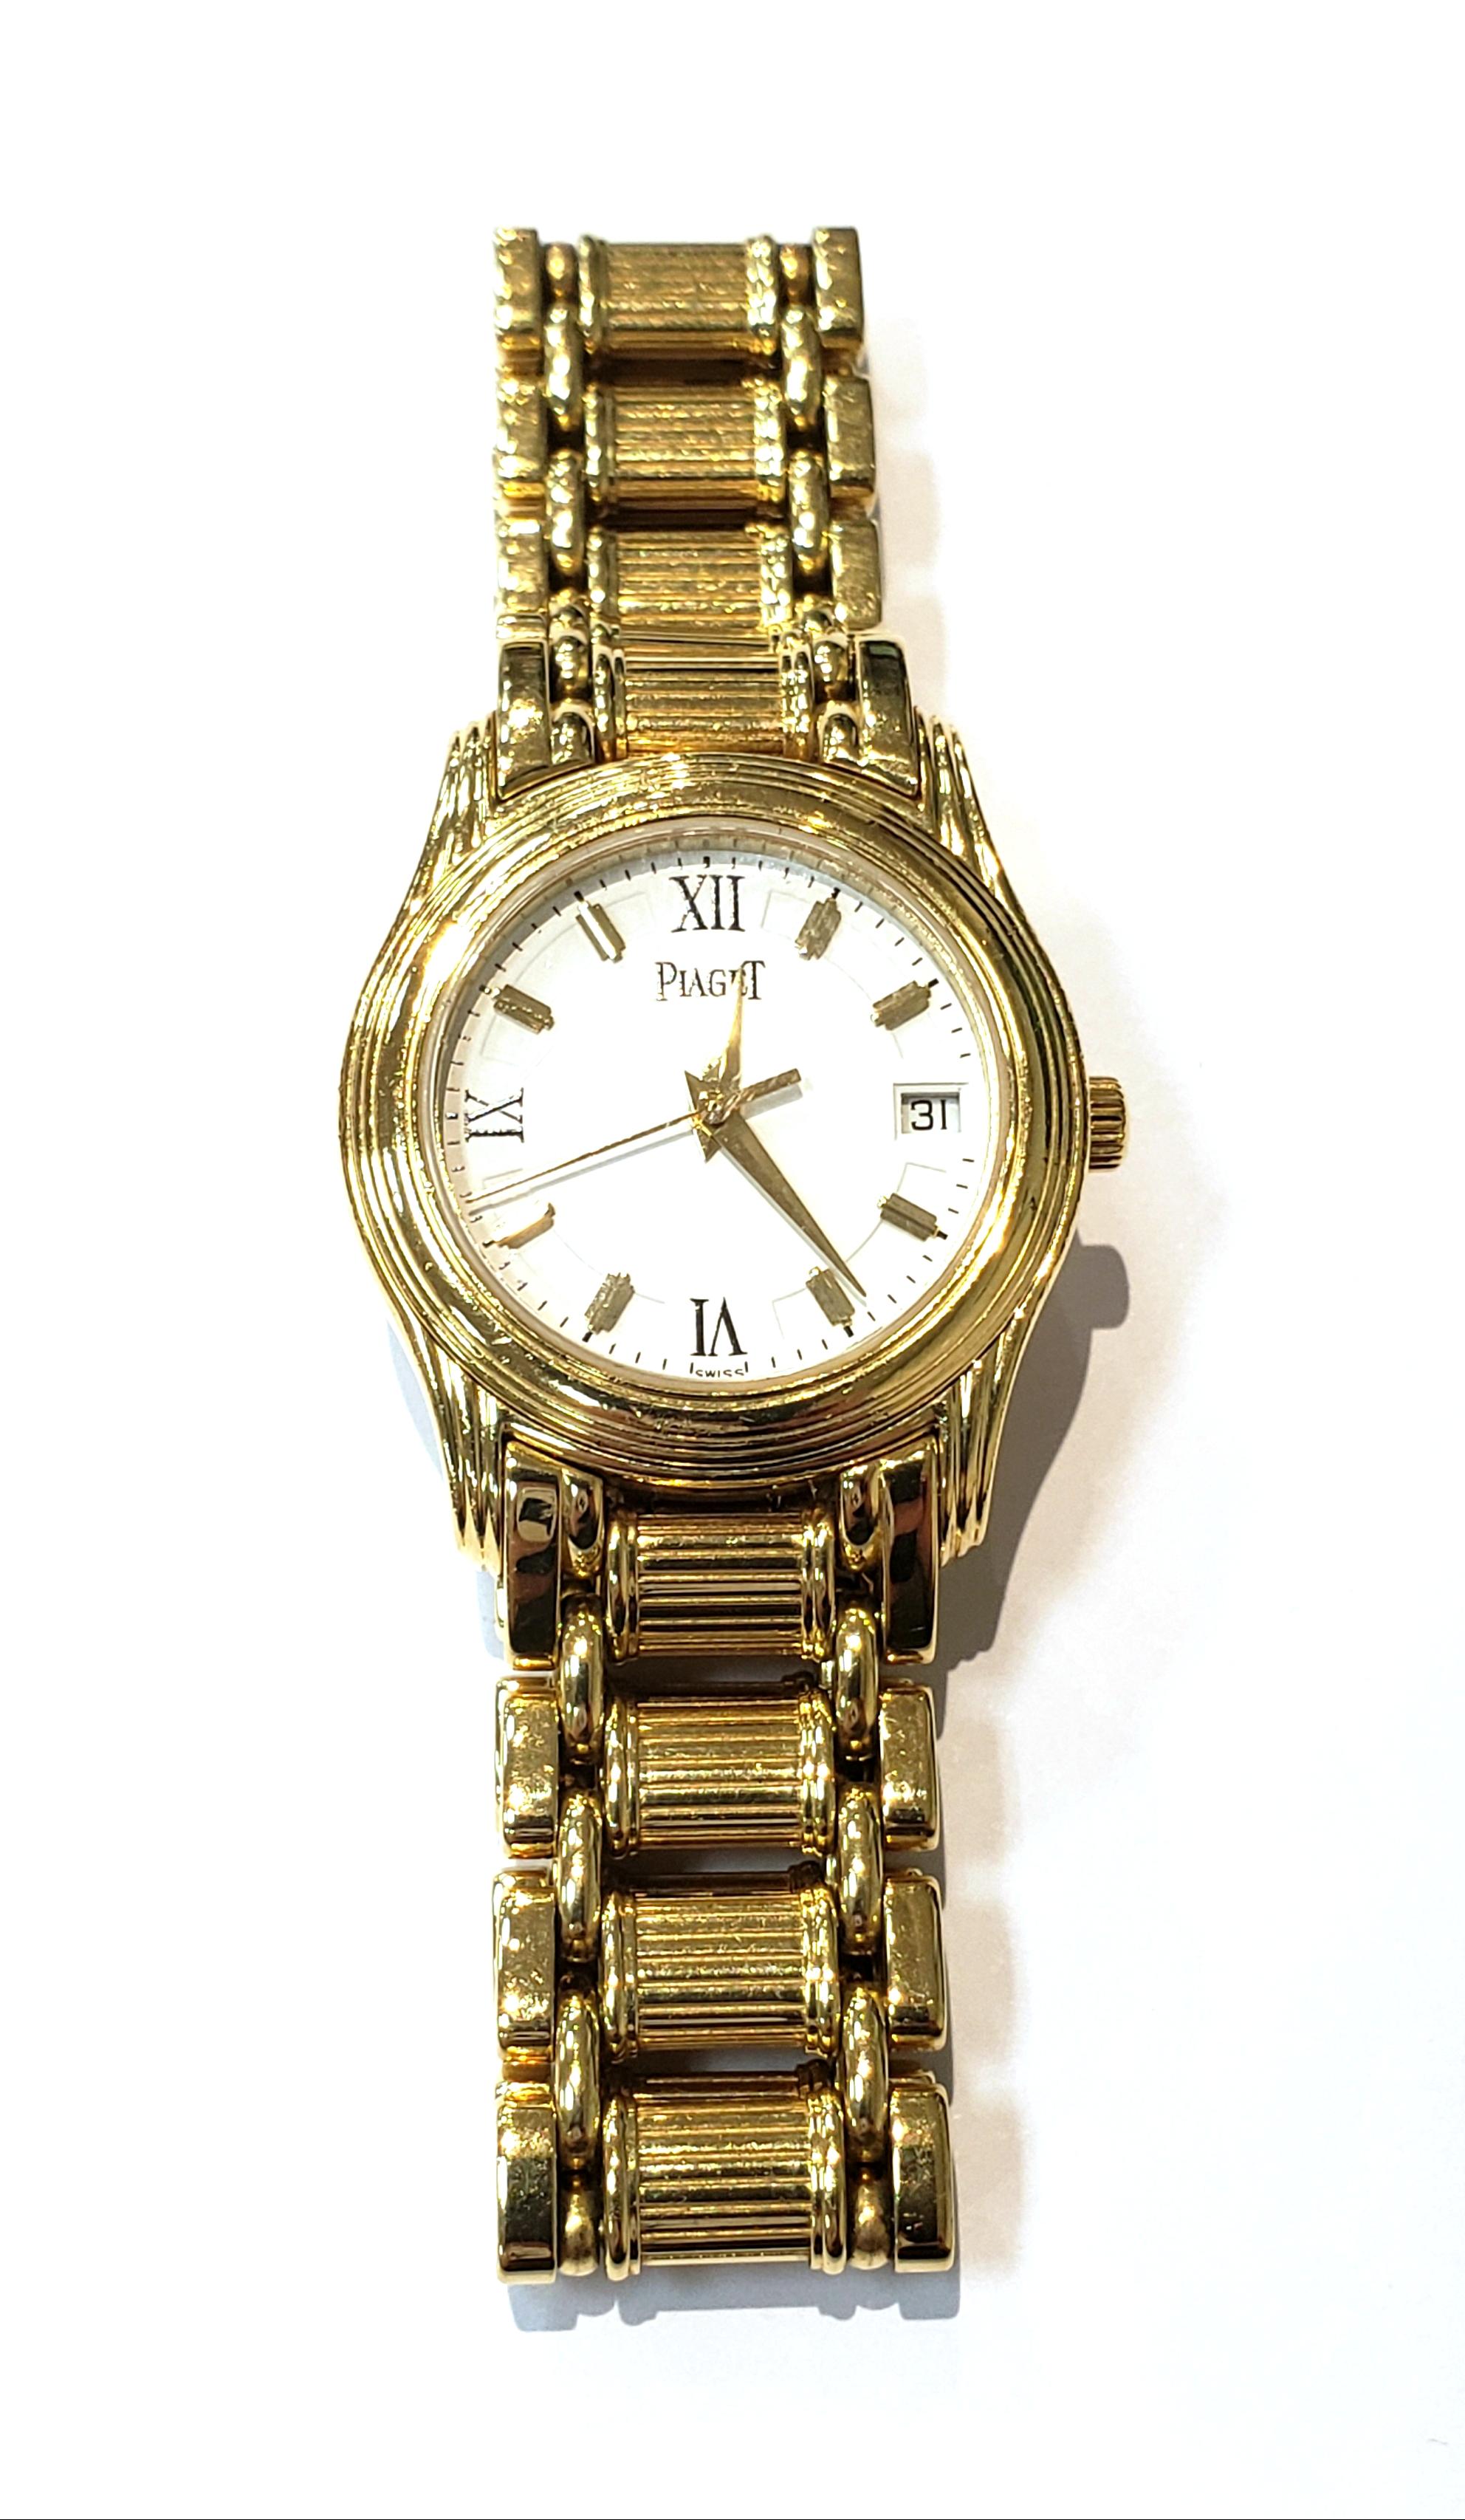 **Lower Price** Reduced From $8000 To $7500. 
Ladies' 18 Karat Yellow Gold Piaget Dancer Watch, with a quartz movement. Watch has a white matt dial with Roman numerals,
& gold markers. watch has a date indicator. Case measures 29 millimeters.